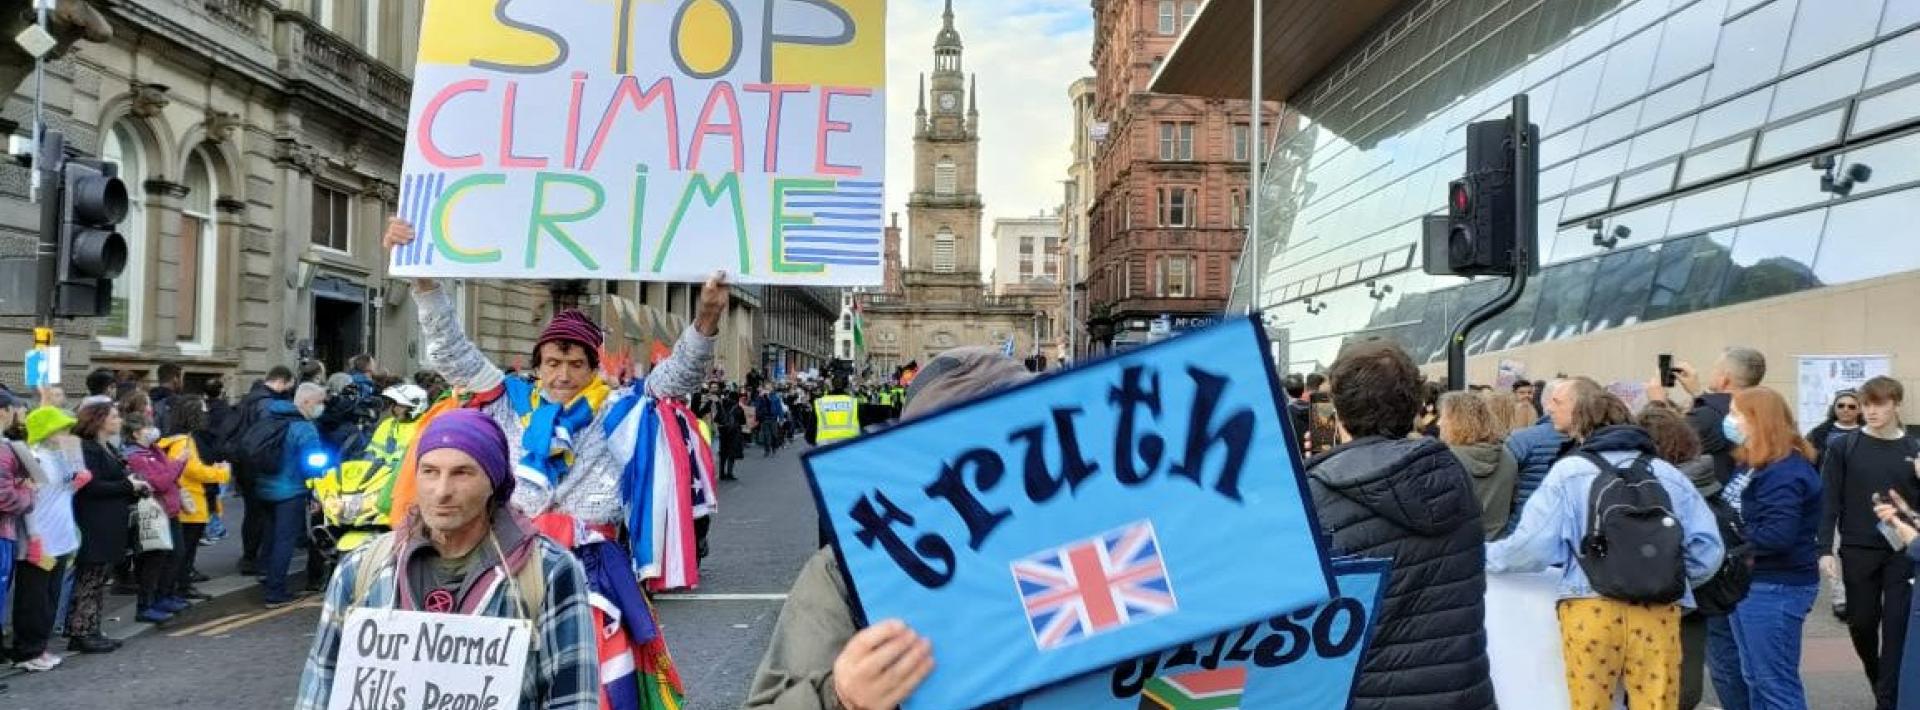 Climate activists George Square in Glasgow demanding action in climate change from world leaders and politicians at COP26. Photo: Shamsuddin Illius 